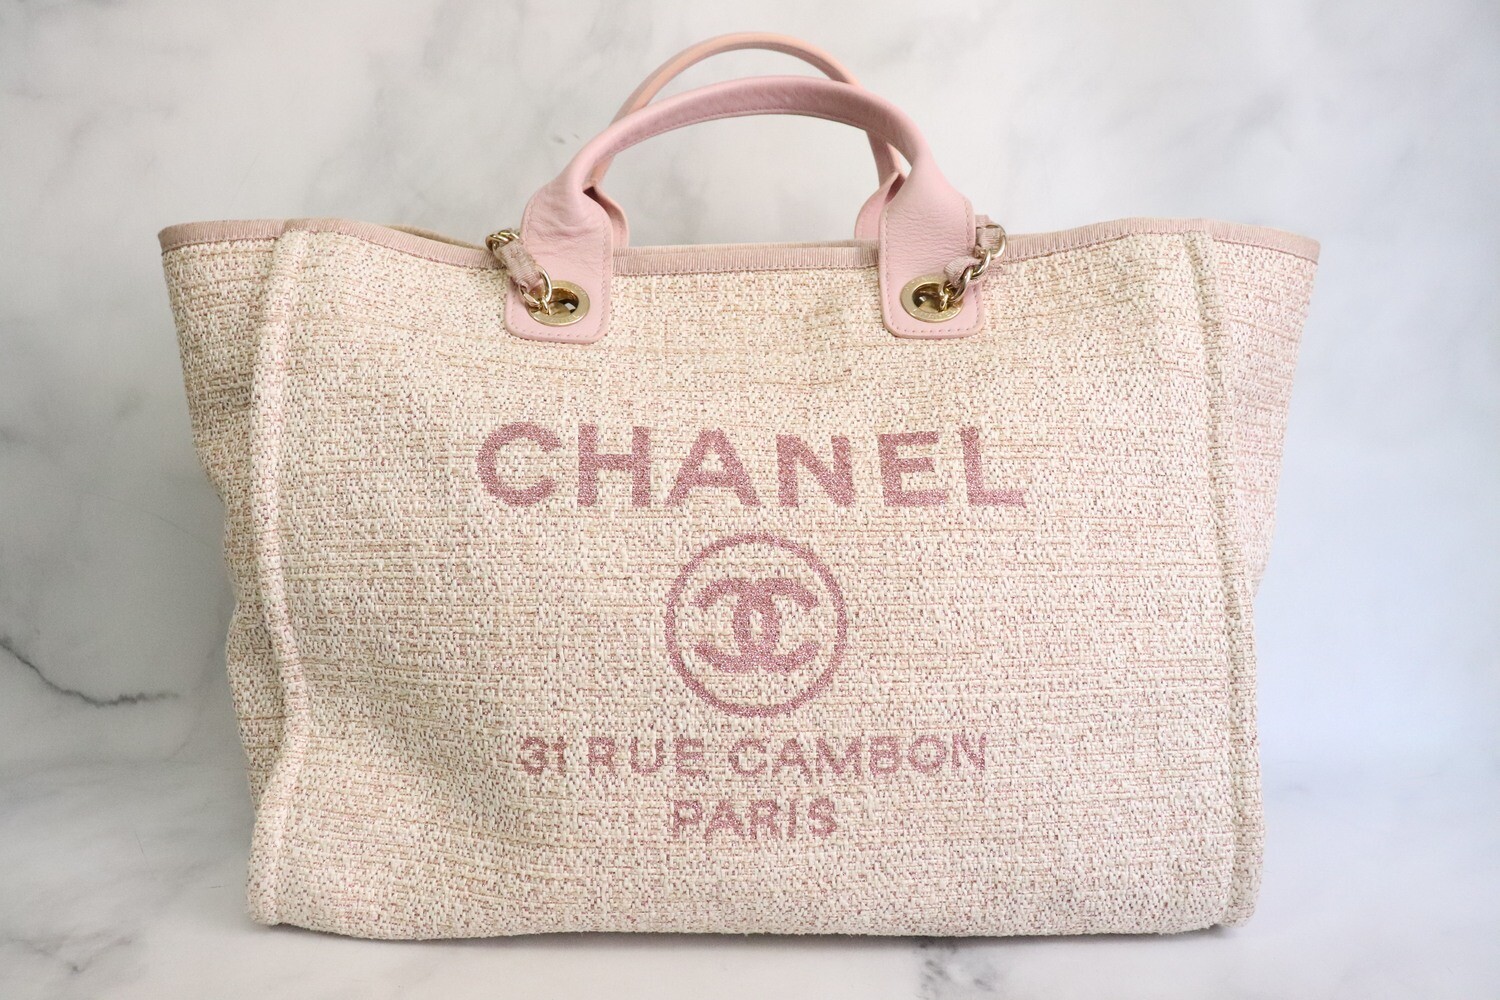 Chanel Deauville Tote Bag, Large, Pink Tweed, Shiny Gold Hardware, Preowned - No Dustbag